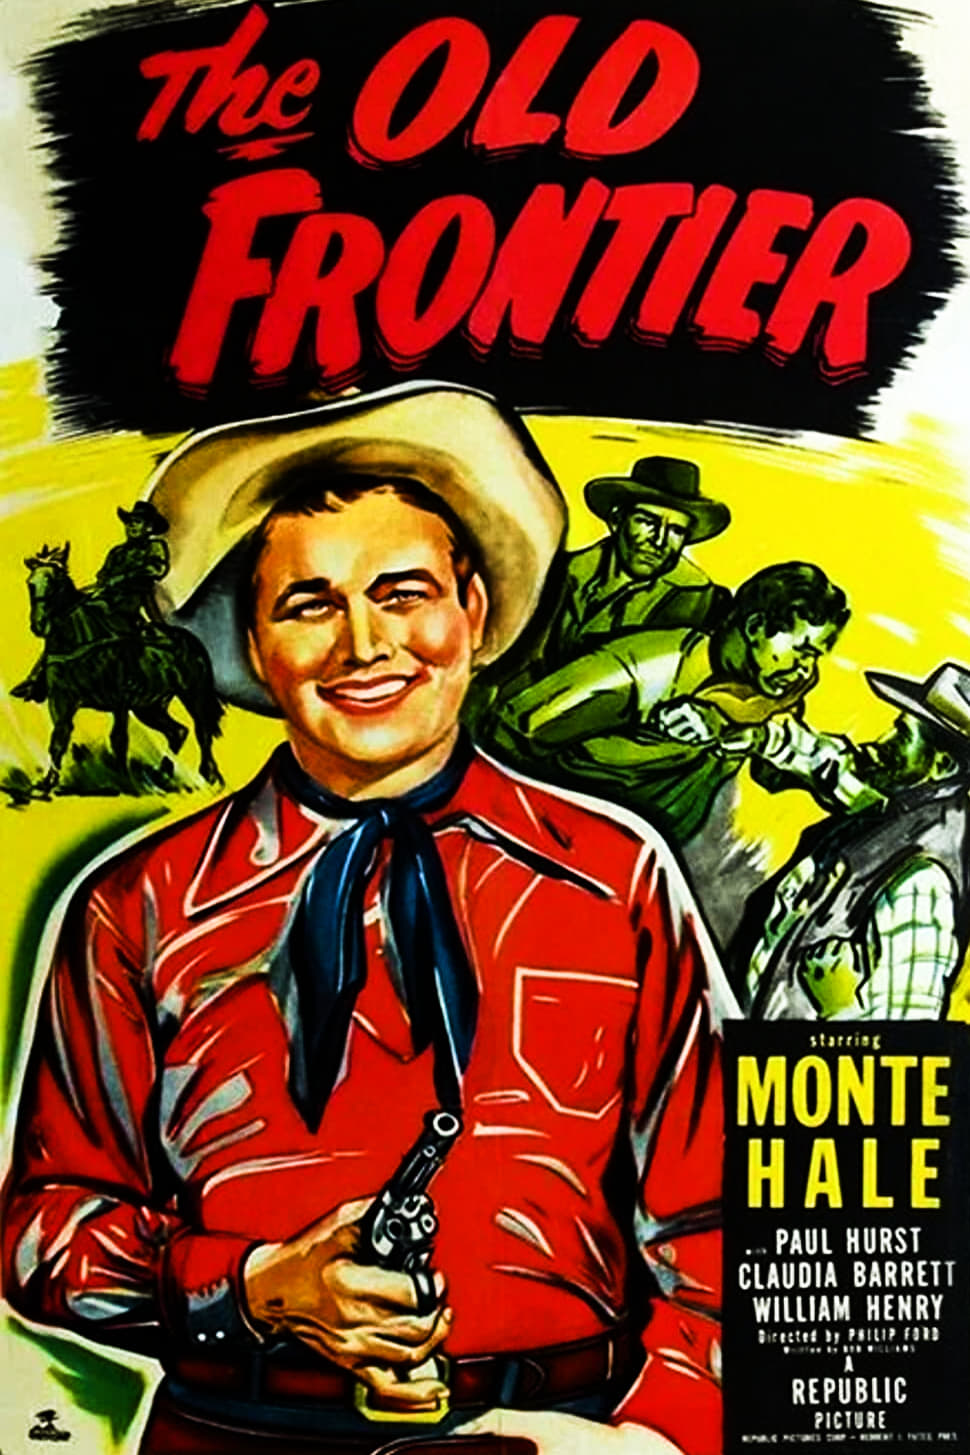 The Old Frontier